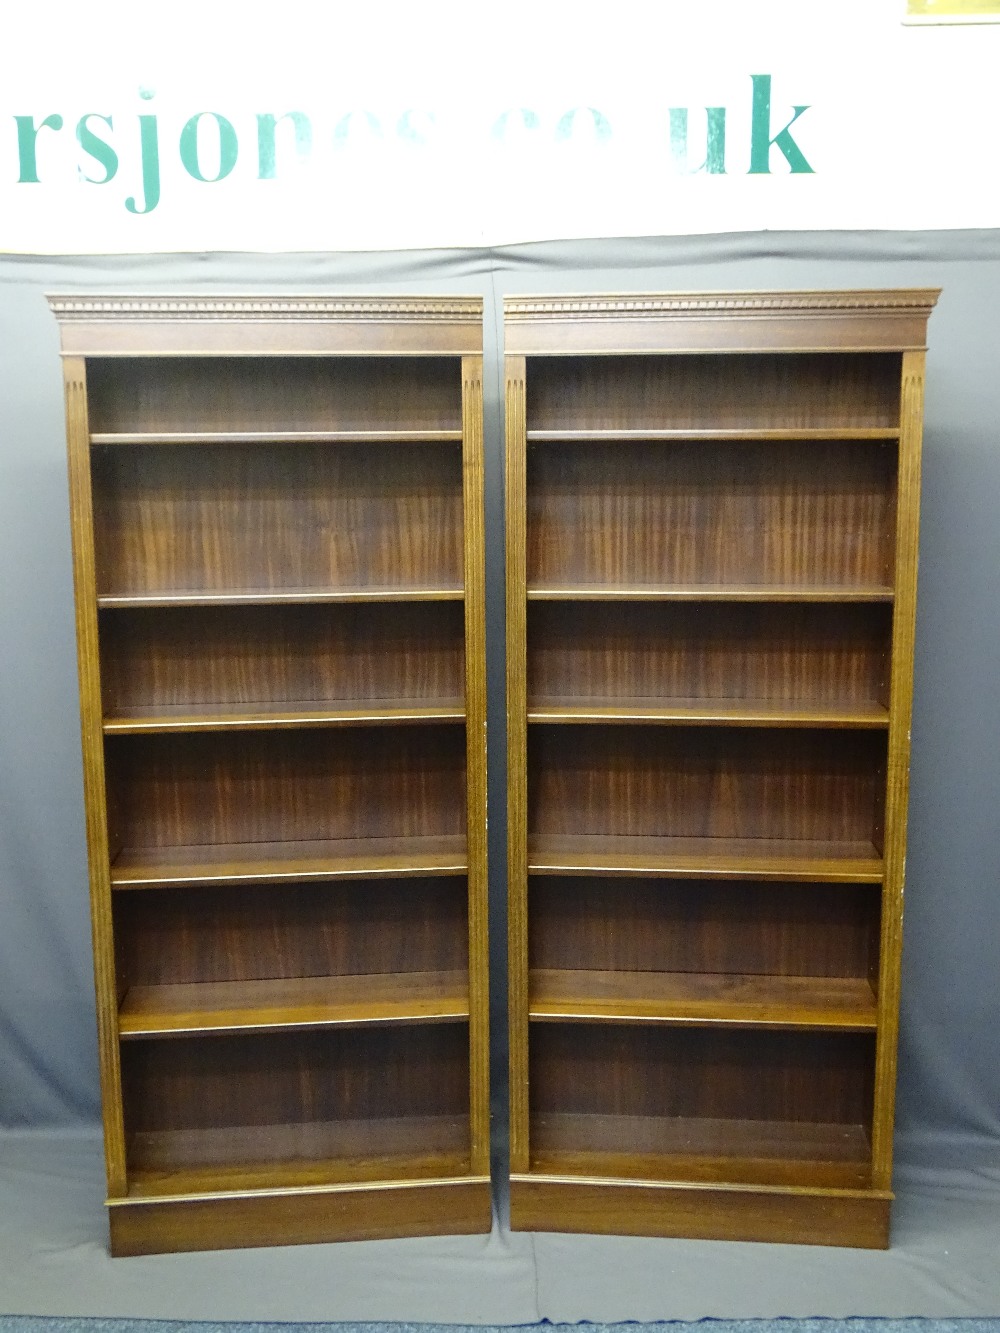 EXCELLENT PAIR OF REPRODUCTION MAHOGANY BOOKCASES with reeded front decoration and fully